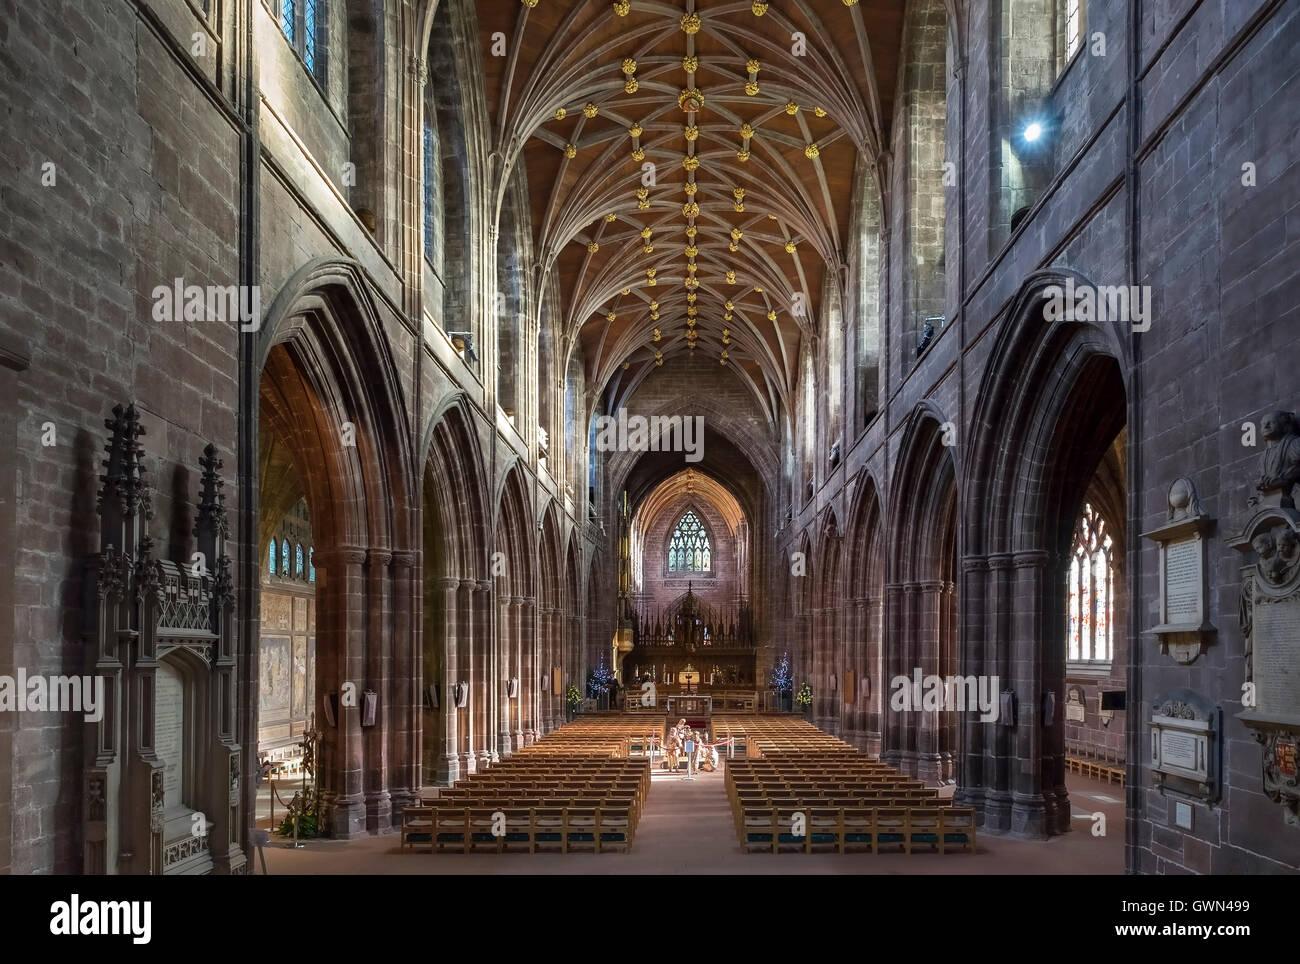 Interior of Chester Cathedral, Chester, Cheshire, England, UK Stock Photo